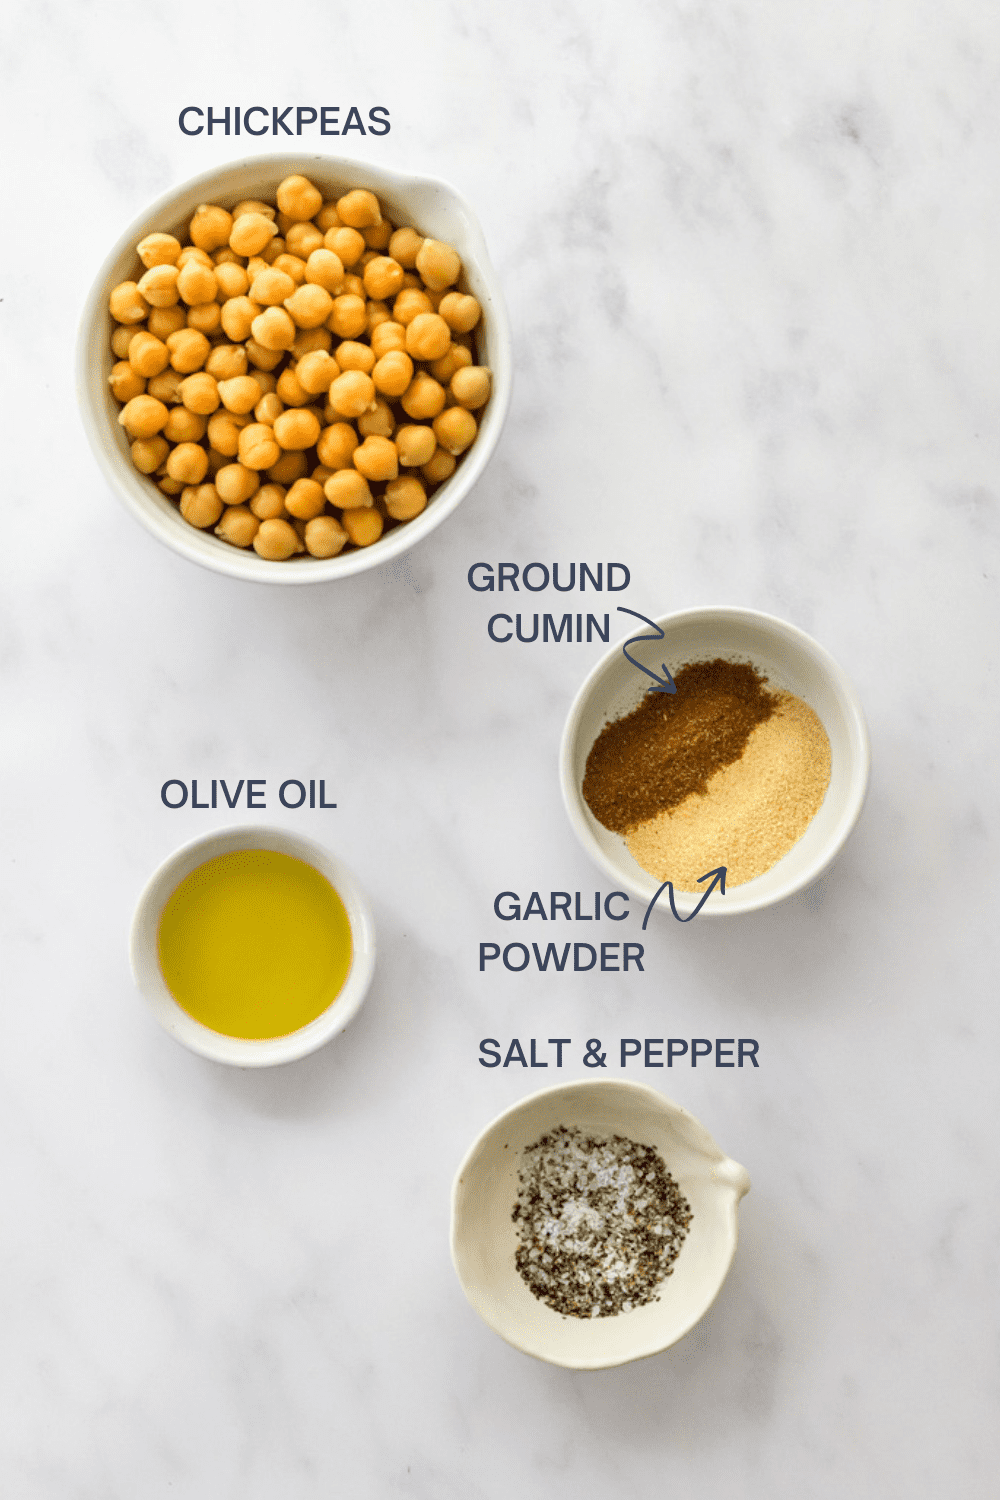 Ingredients for air fryer chickpeas with labels for each ingredient.